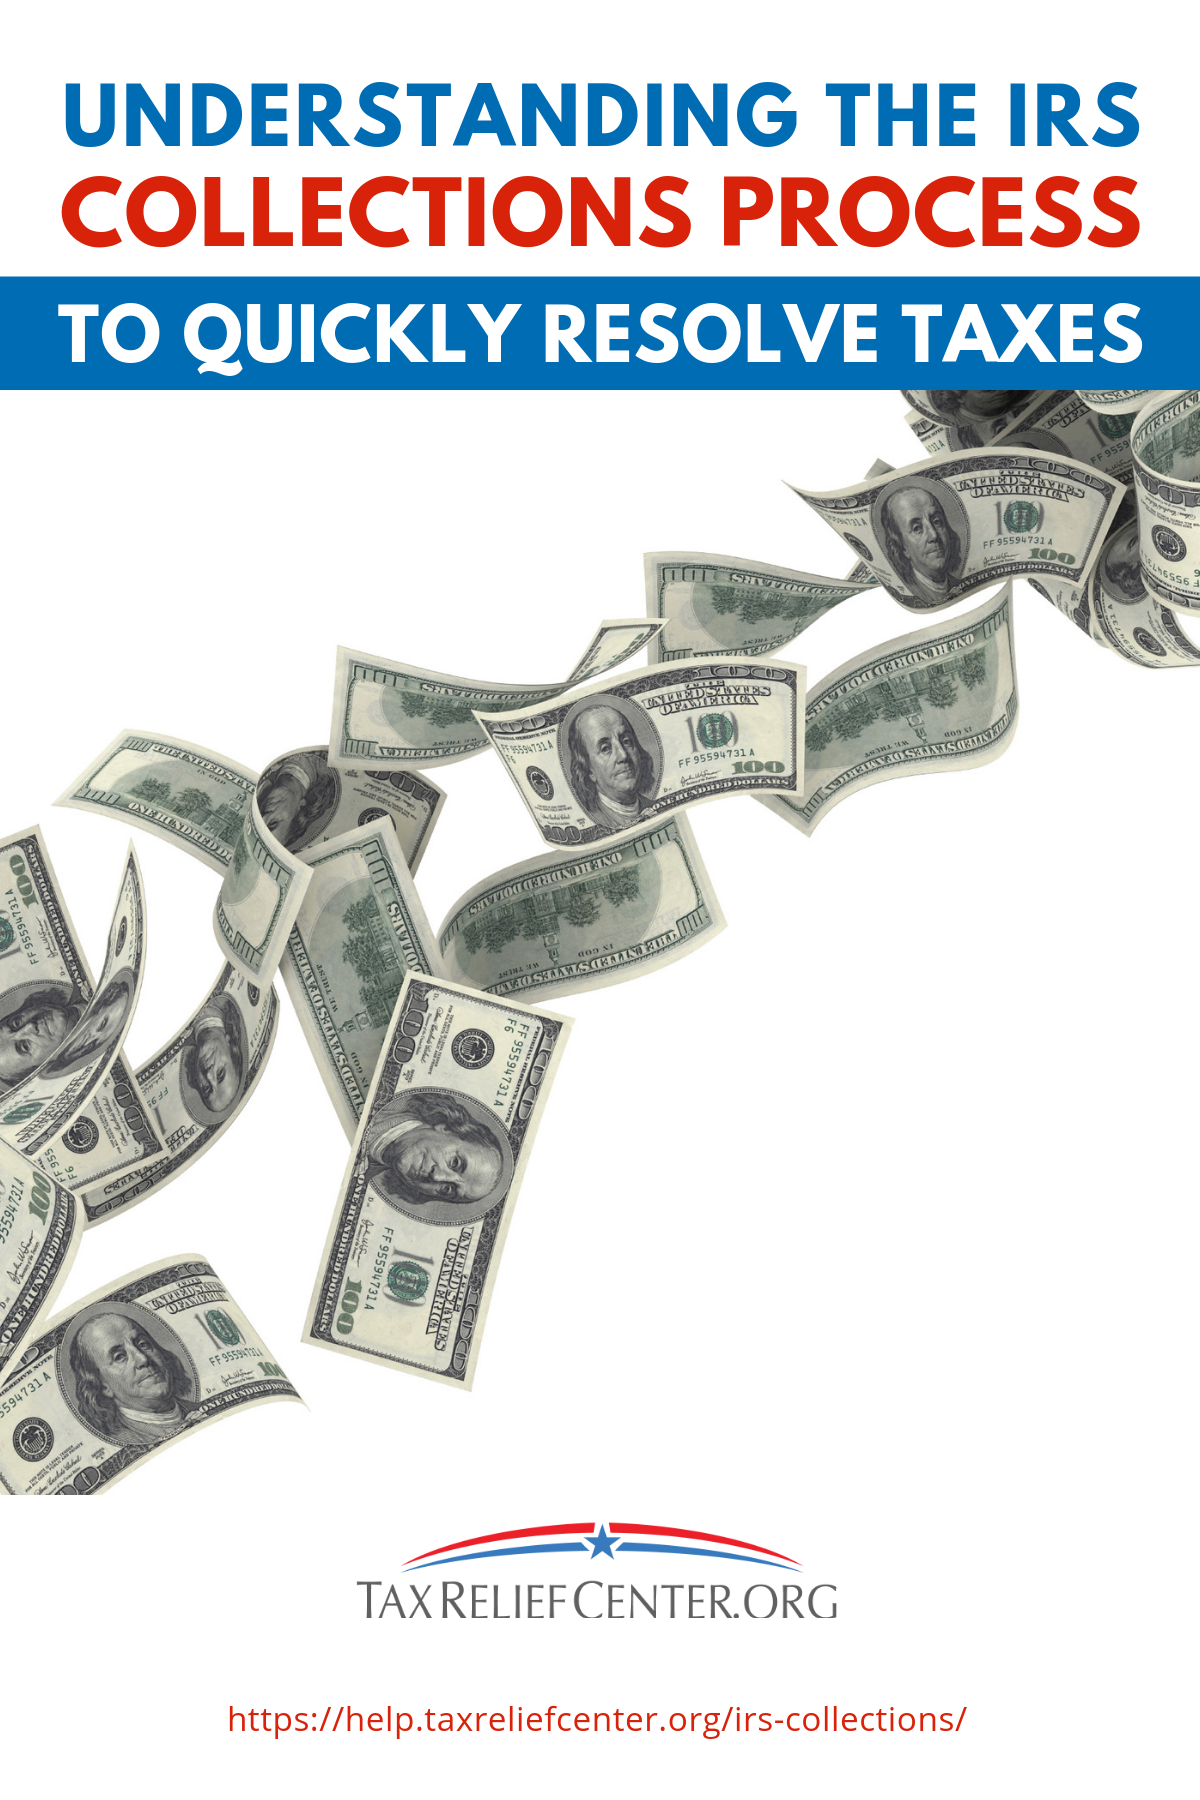 Understanding The IRS Collections Process To Quickly Resolve Taxes https://help.taxreliefcenter.org/irs-collections/